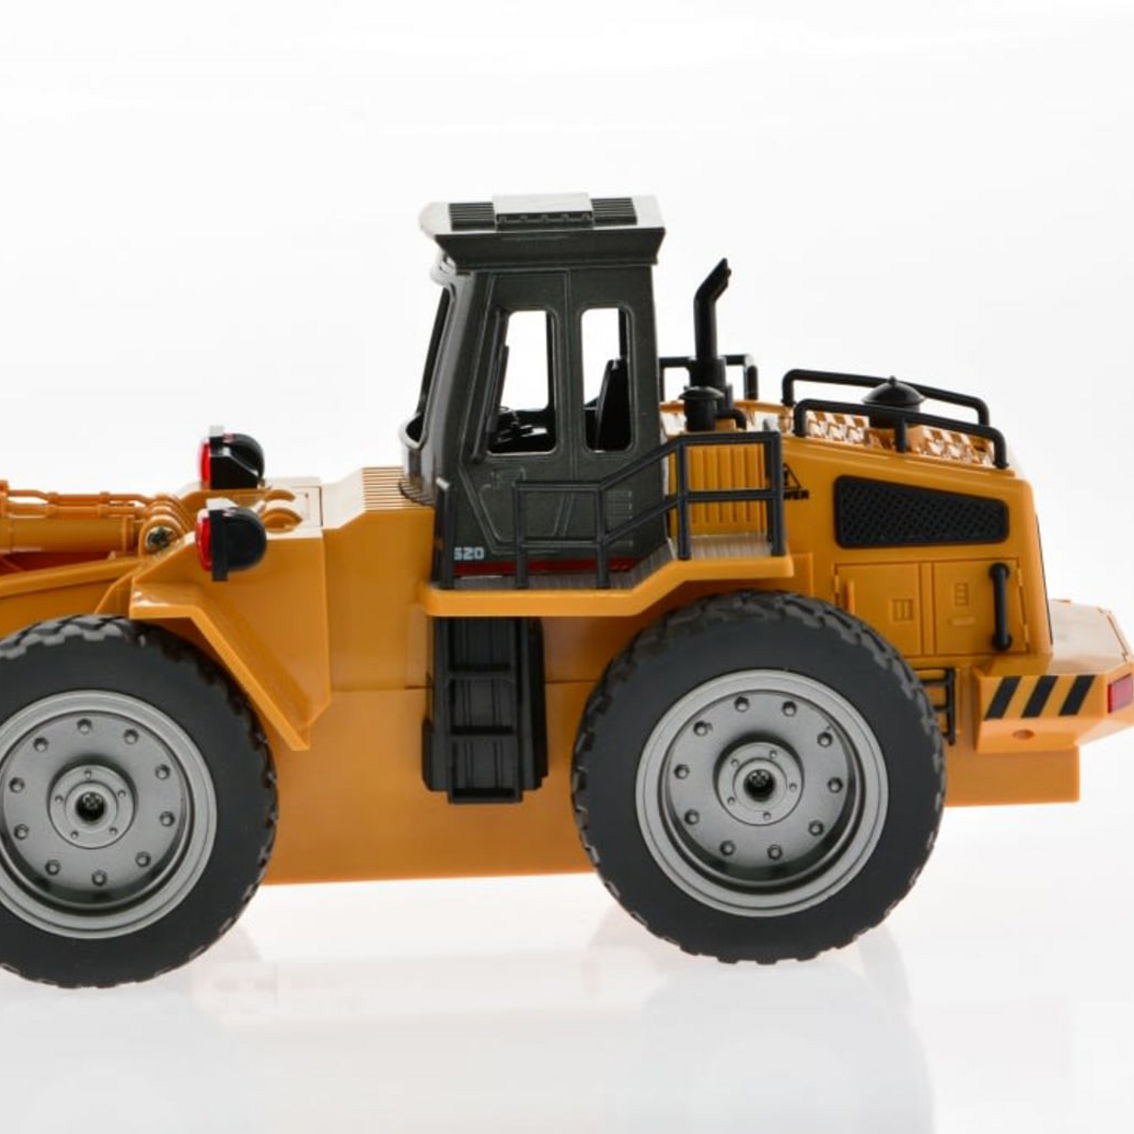 CIS-1520 1:18 2.4 Ghz 6 ch front loader with die cast bucket rechargeable batteries - Image 2 of 5